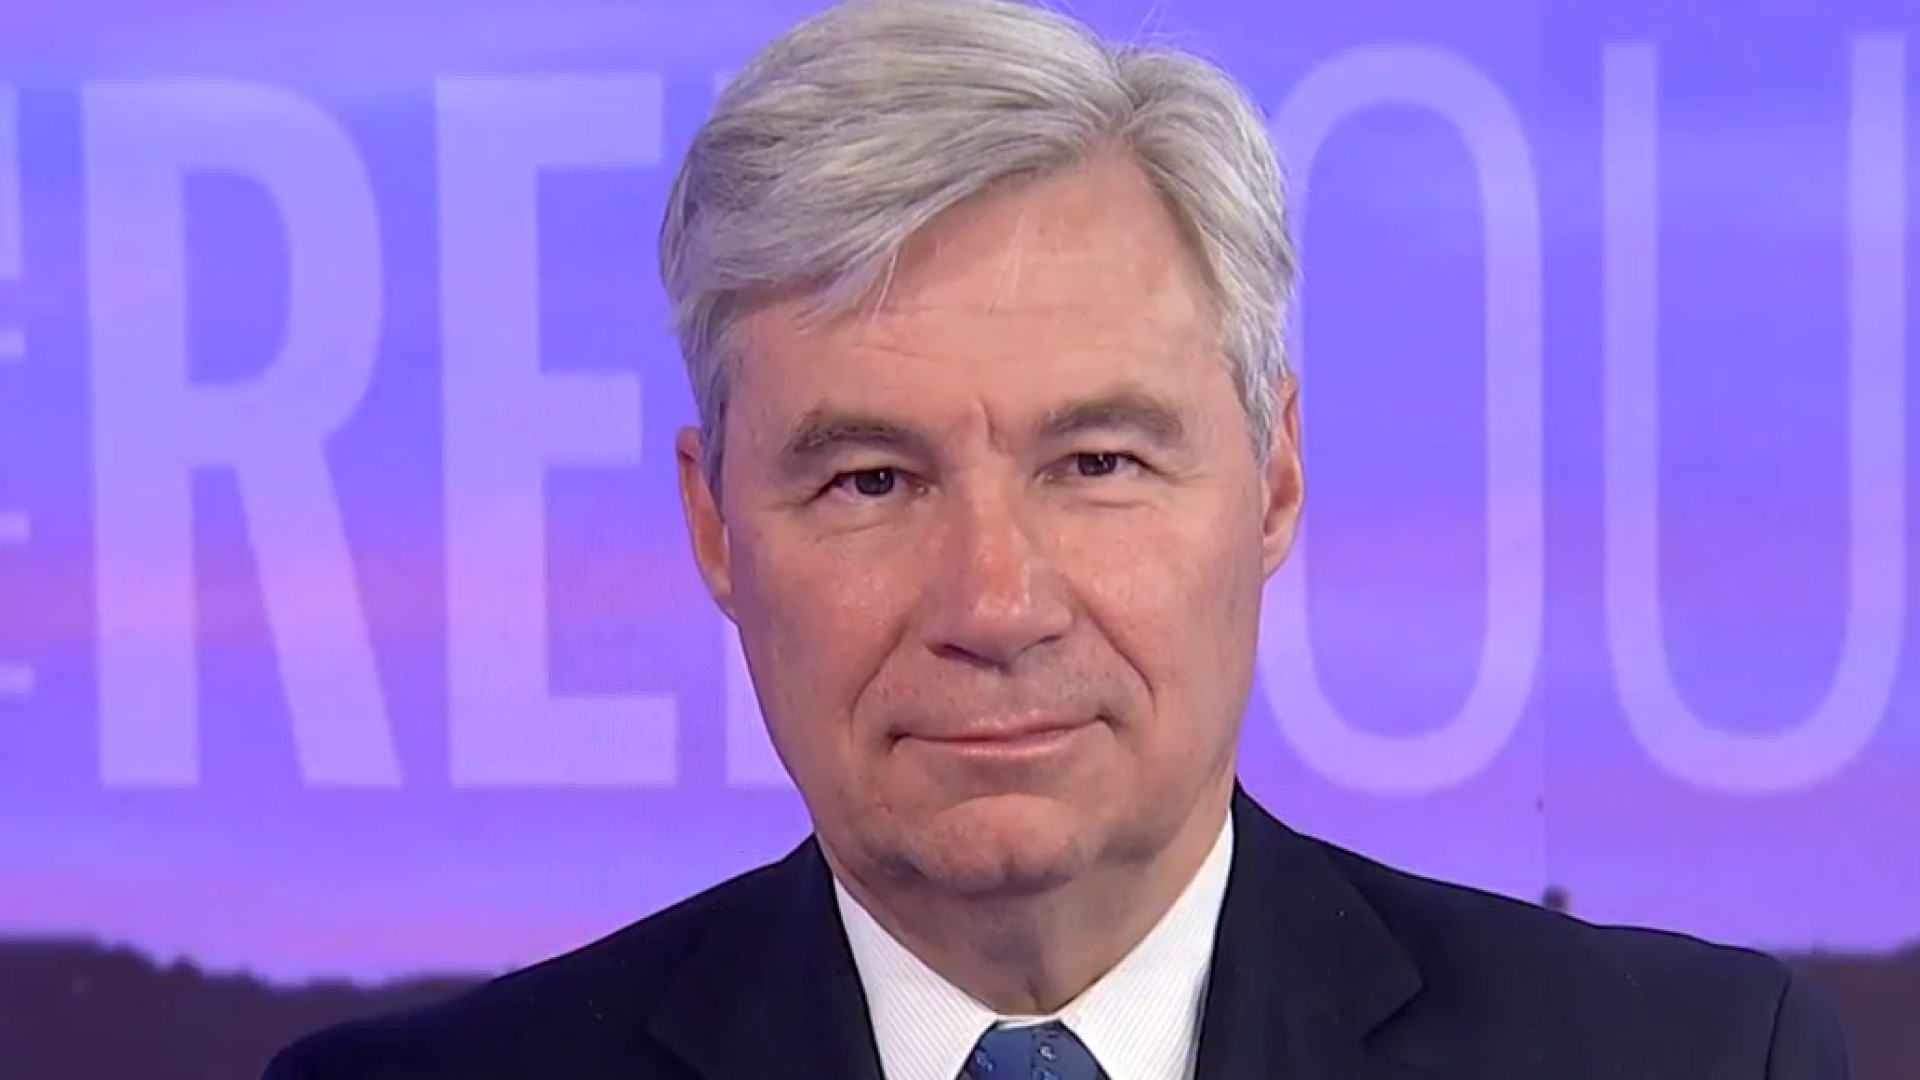 Sen. Whitehouse on Democrats on the Judiciary Committee calling for Supreme Court ethics reform thumbnail